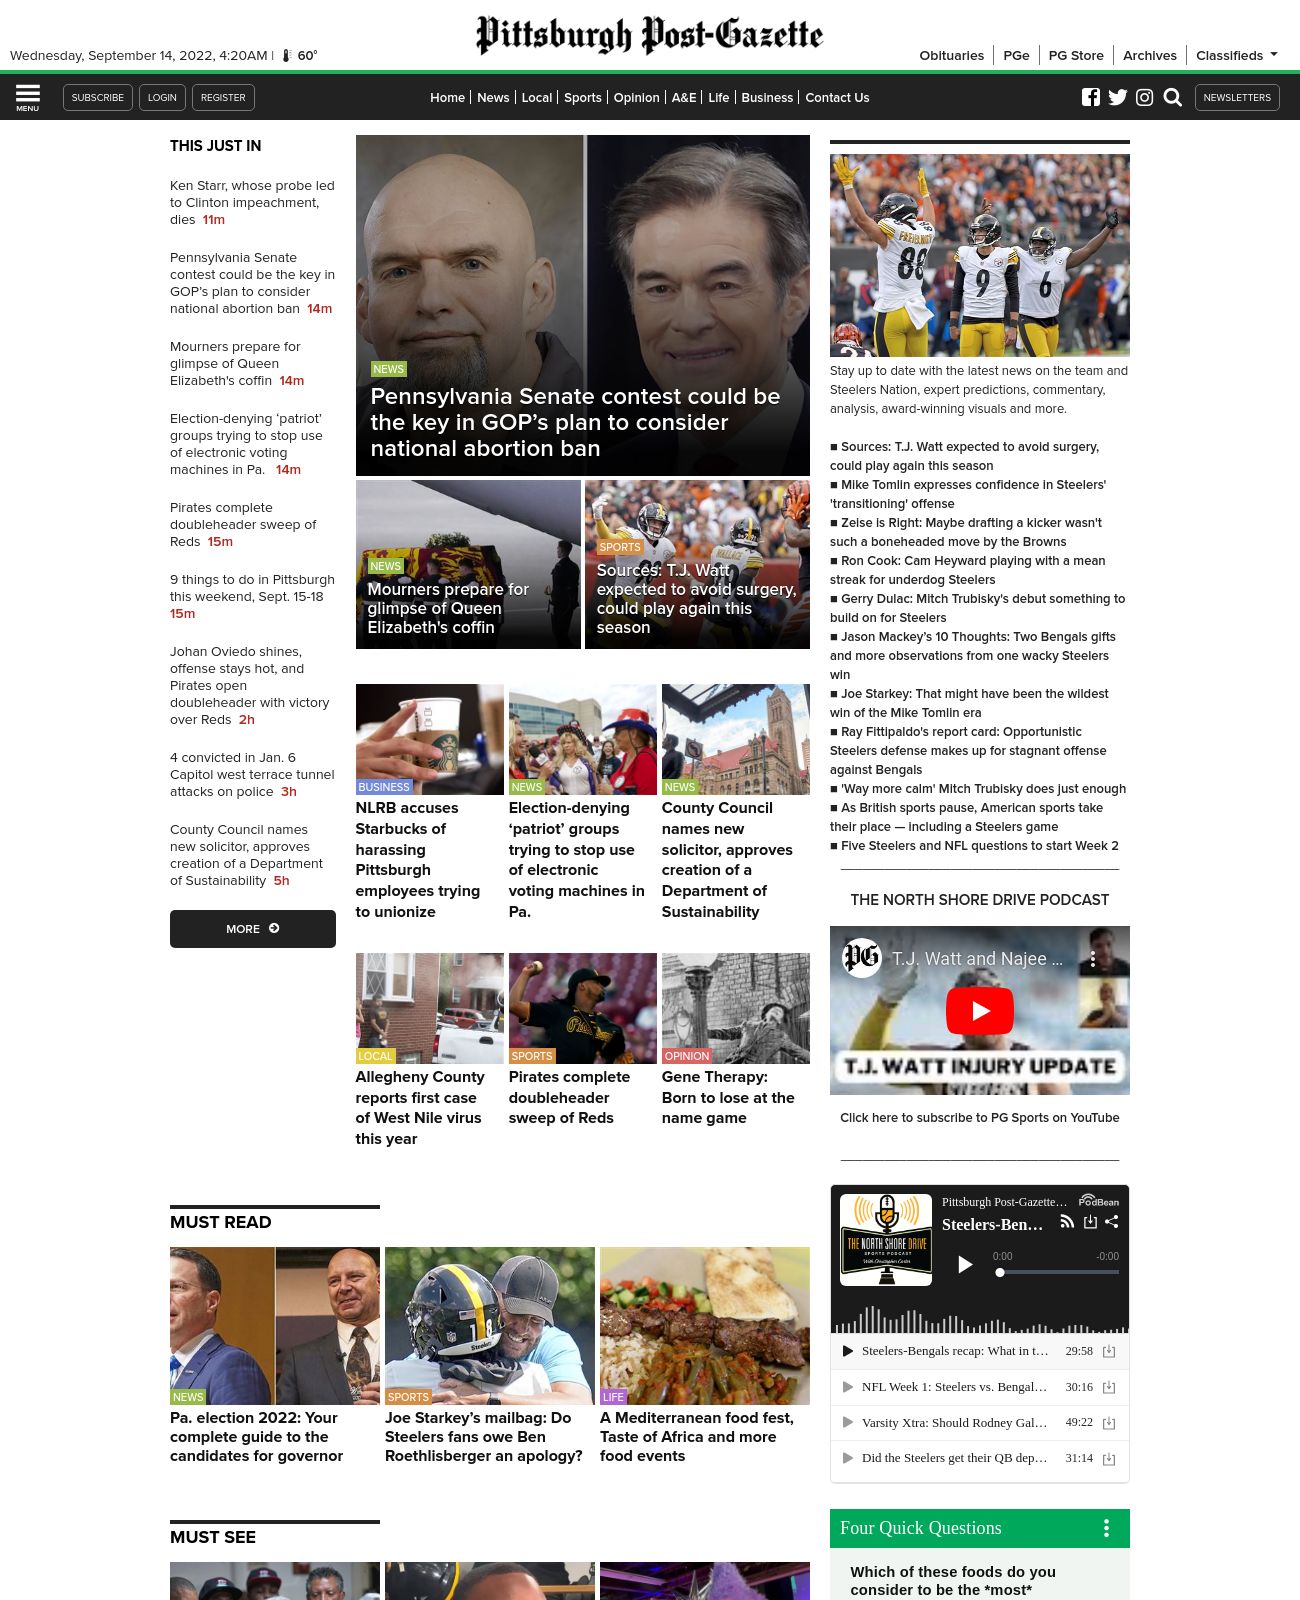 Pittsburgh Post-Gazette at 2022-09-14 00:48:33-04:00 local time